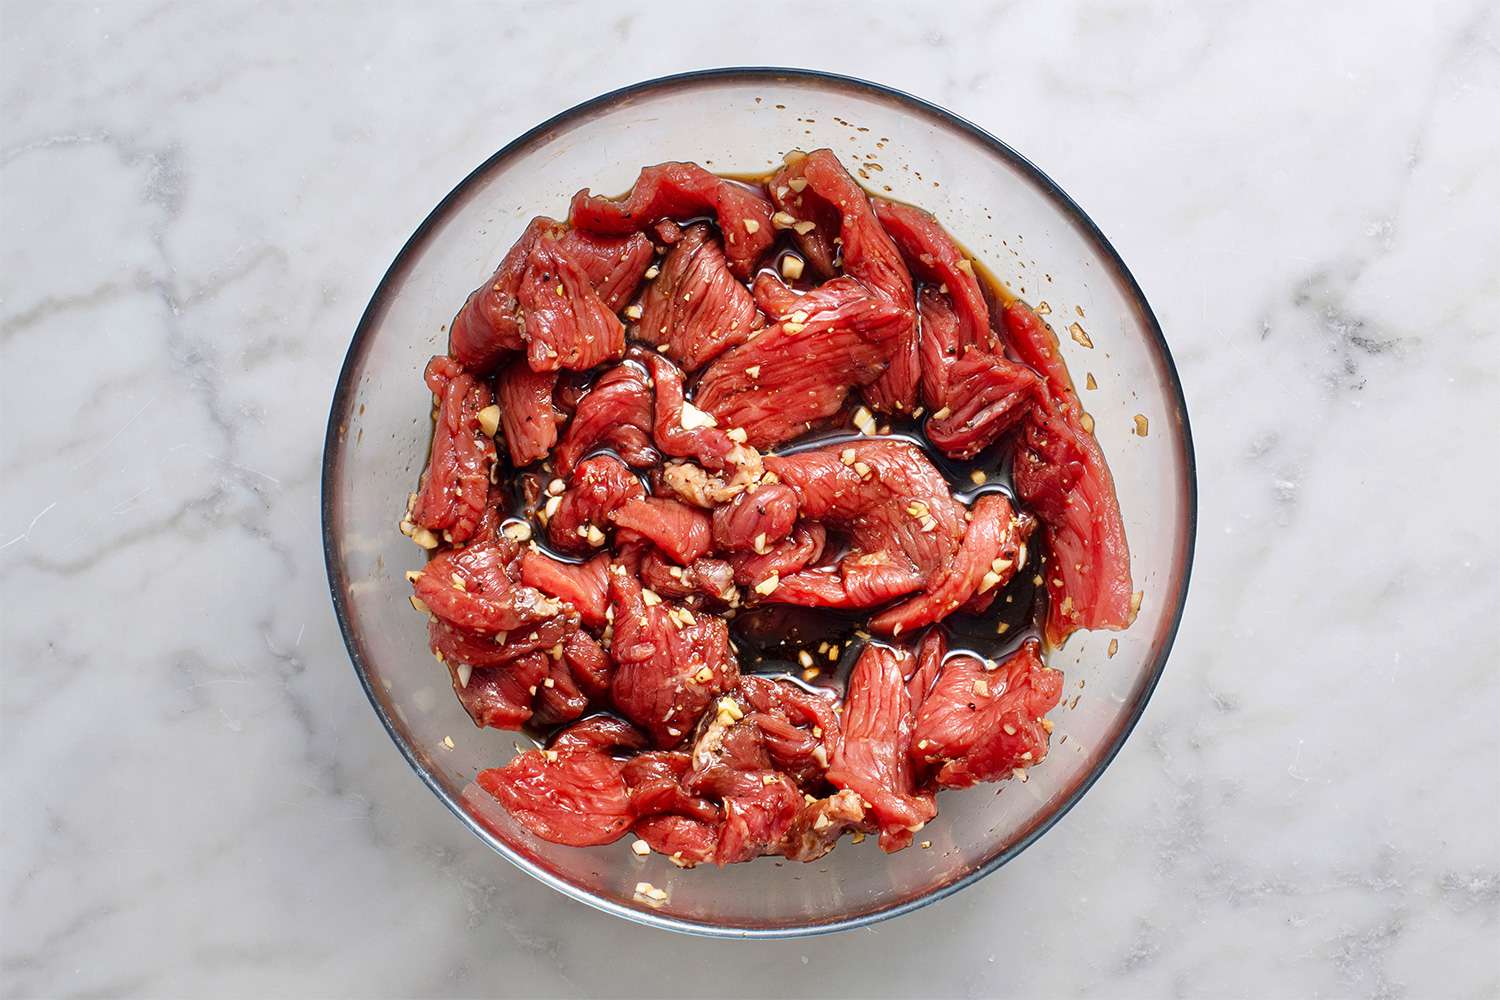 Meat and marinade in a bowl 